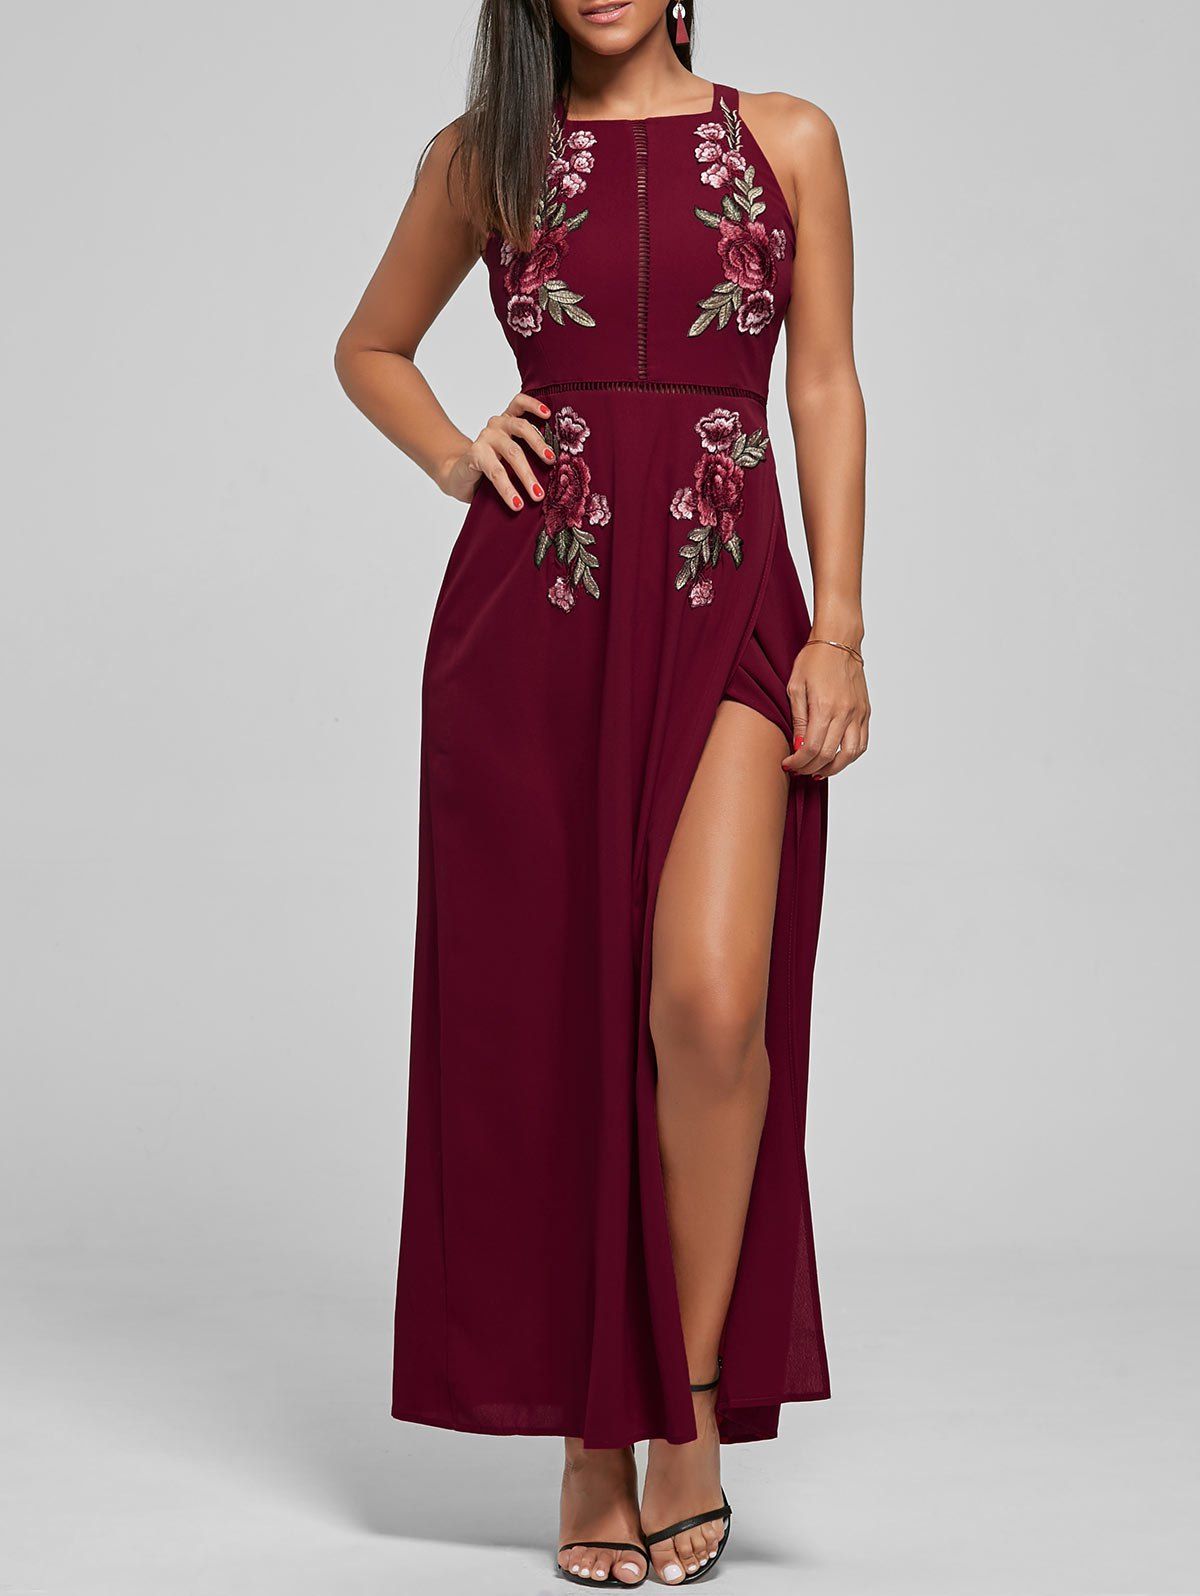 Latest Embroidered Backless Thigh High Slit Maxi Dress  